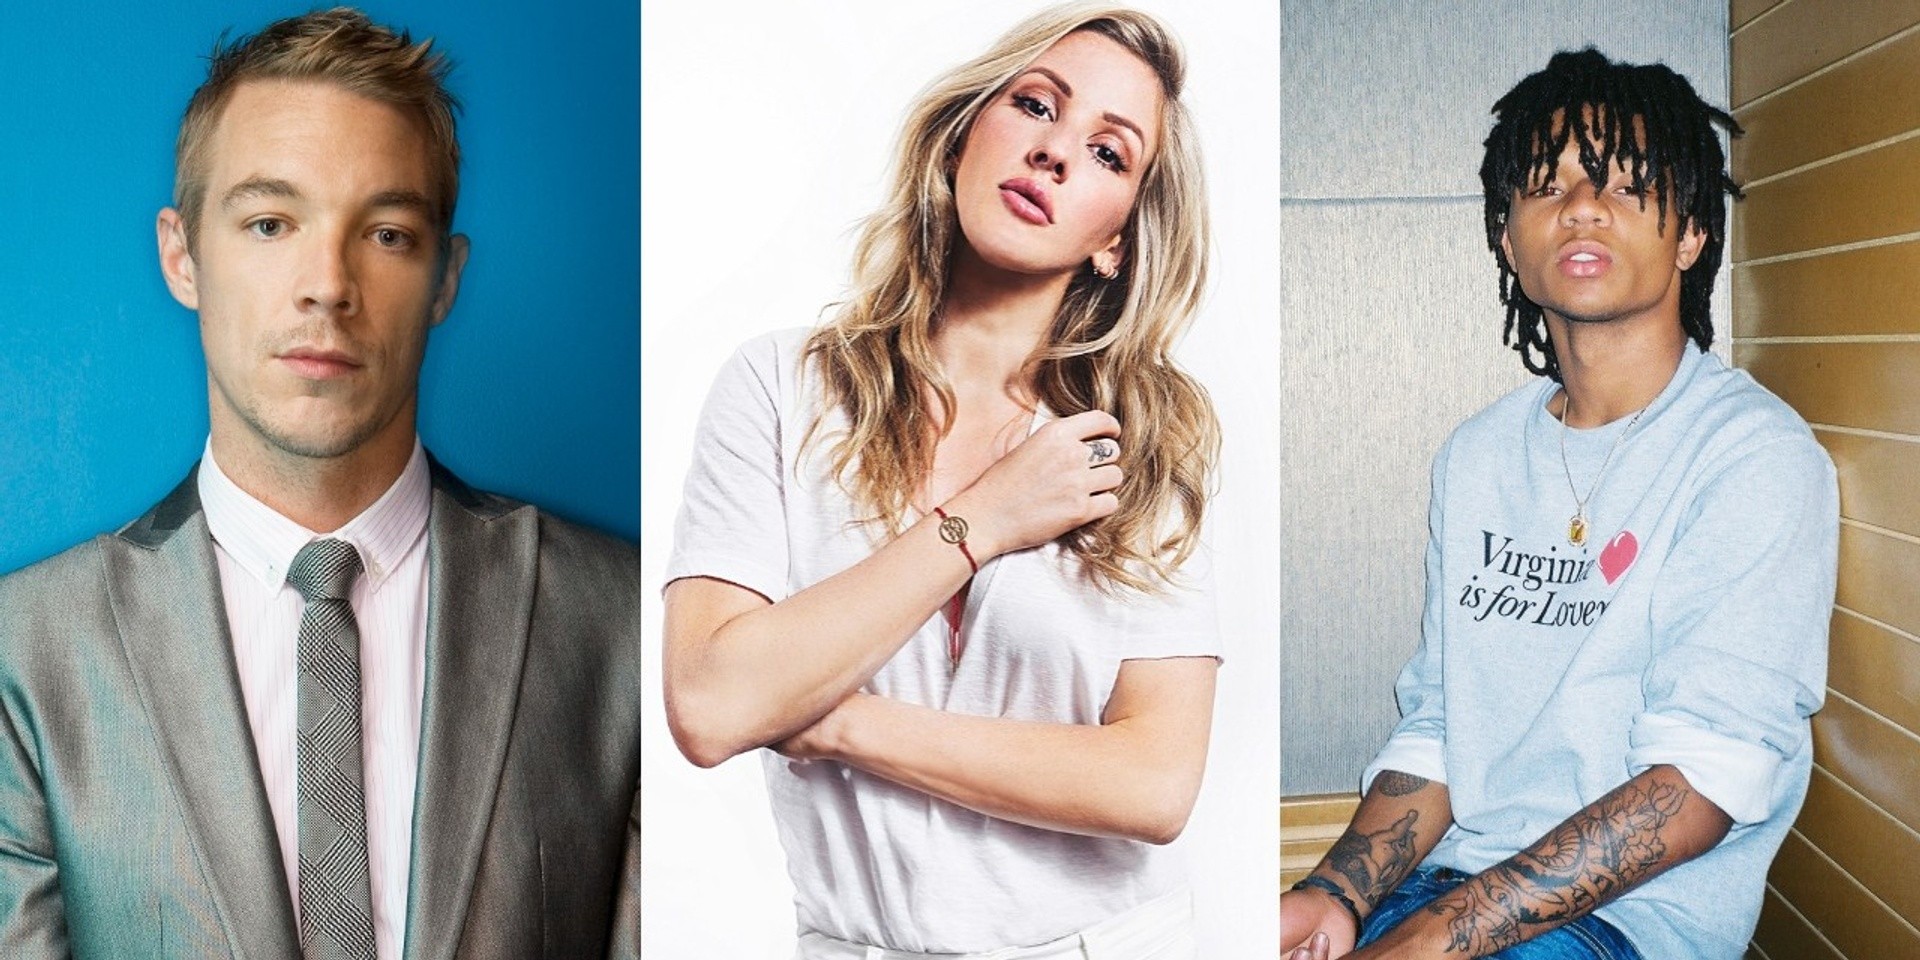 Ellie Goulding teams up with Diplo and Swae Lee for first track in three years 'Close To Me' – listen 